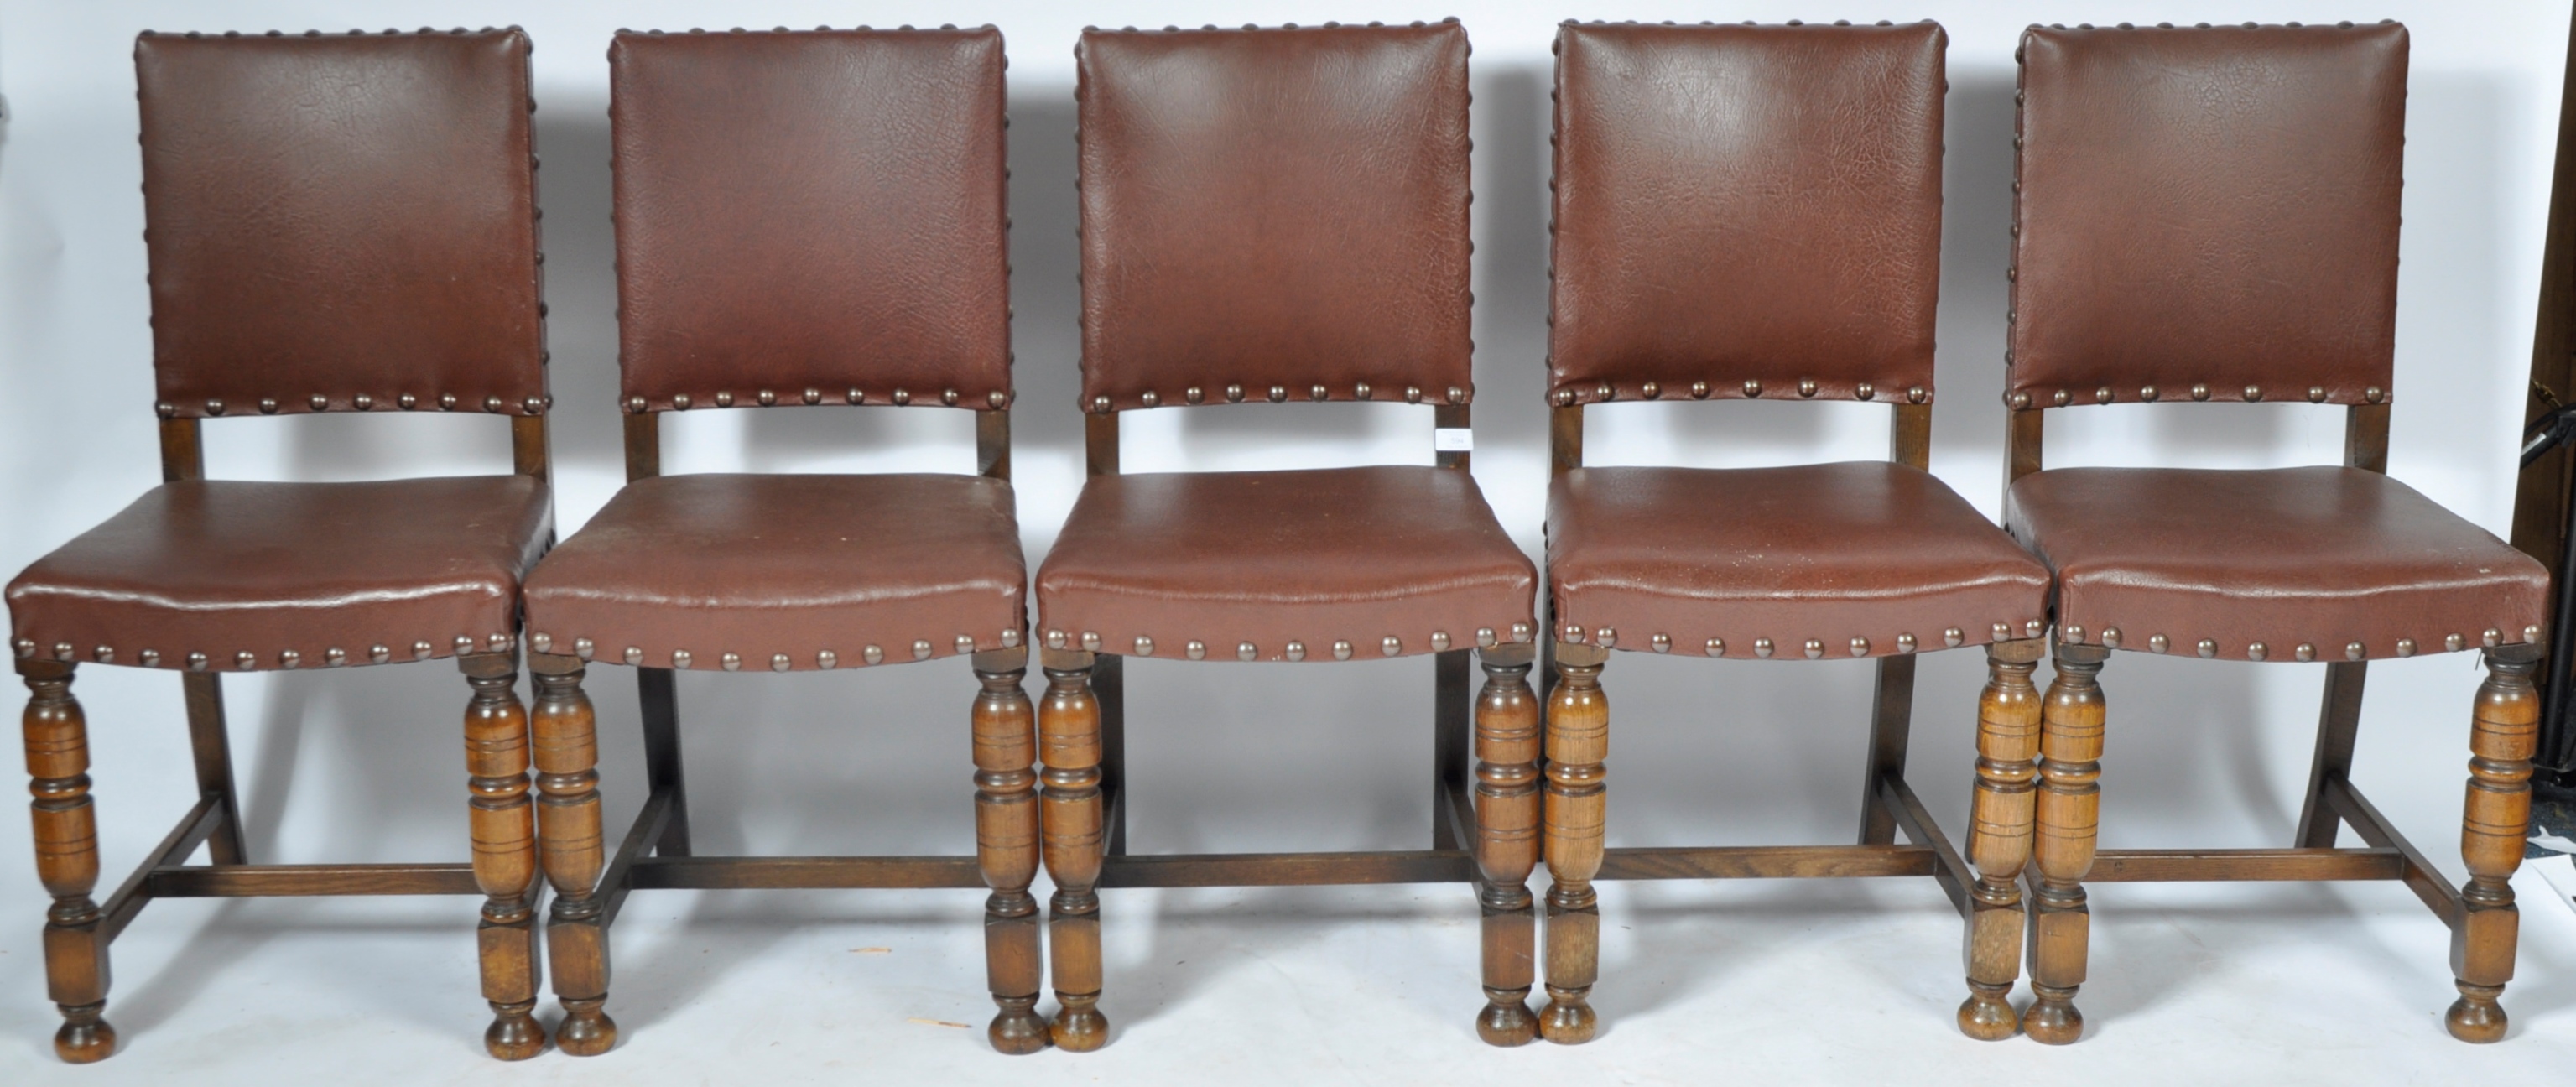 MATCHING SET OF TEN OAK AND LEATHERETTE DINING CHAIRS - Image 8 of 11